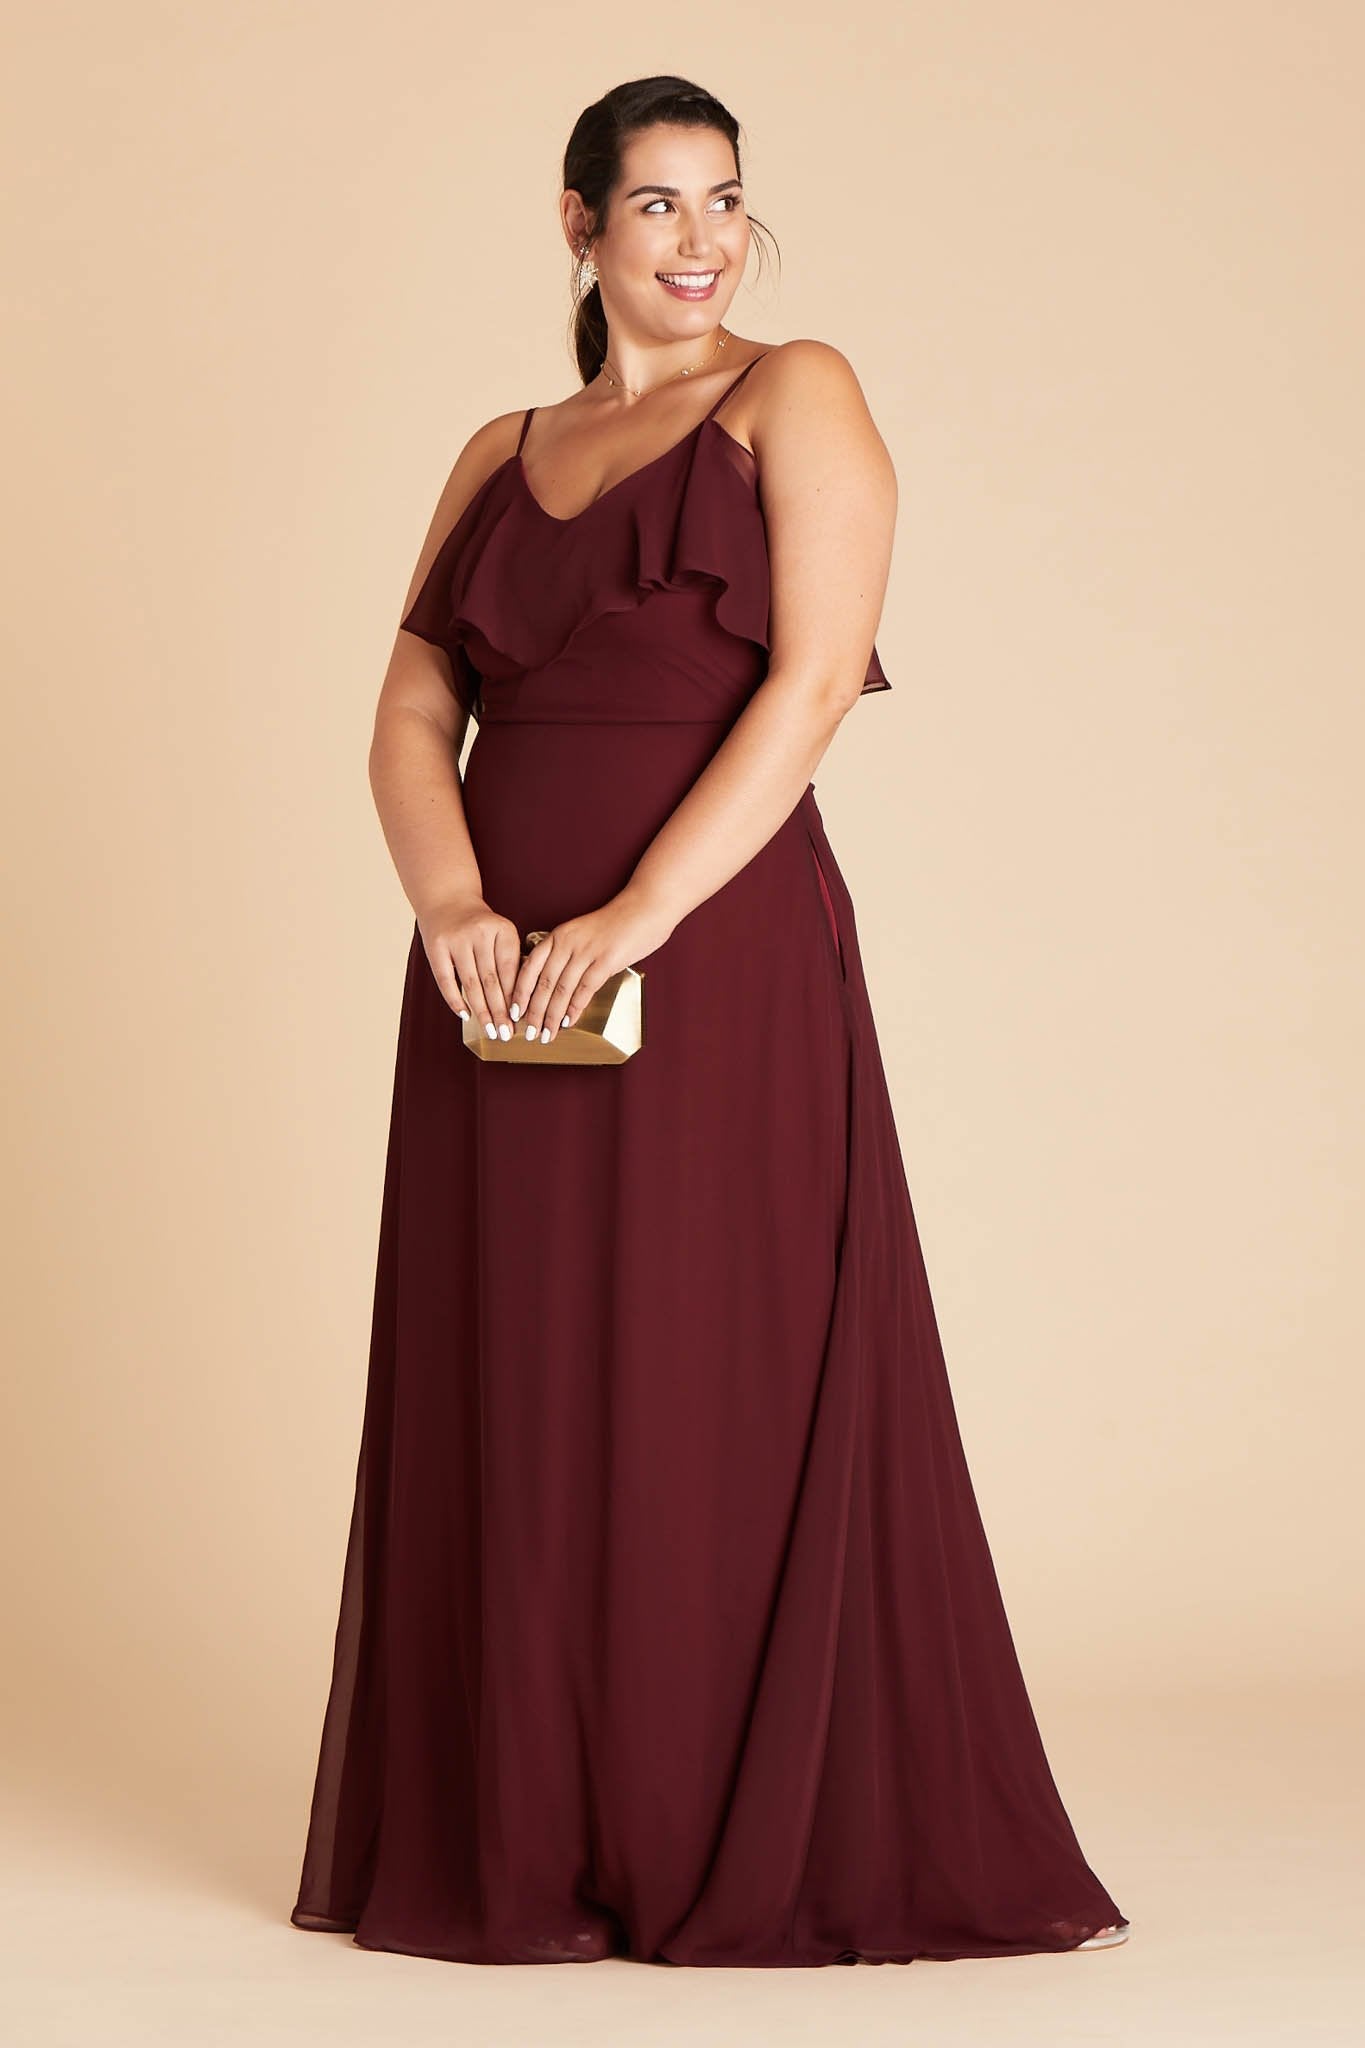 Jane convertible plus size bridesmaid dress in Cabernet Burgundy chiffon by Birdy Grey, front view